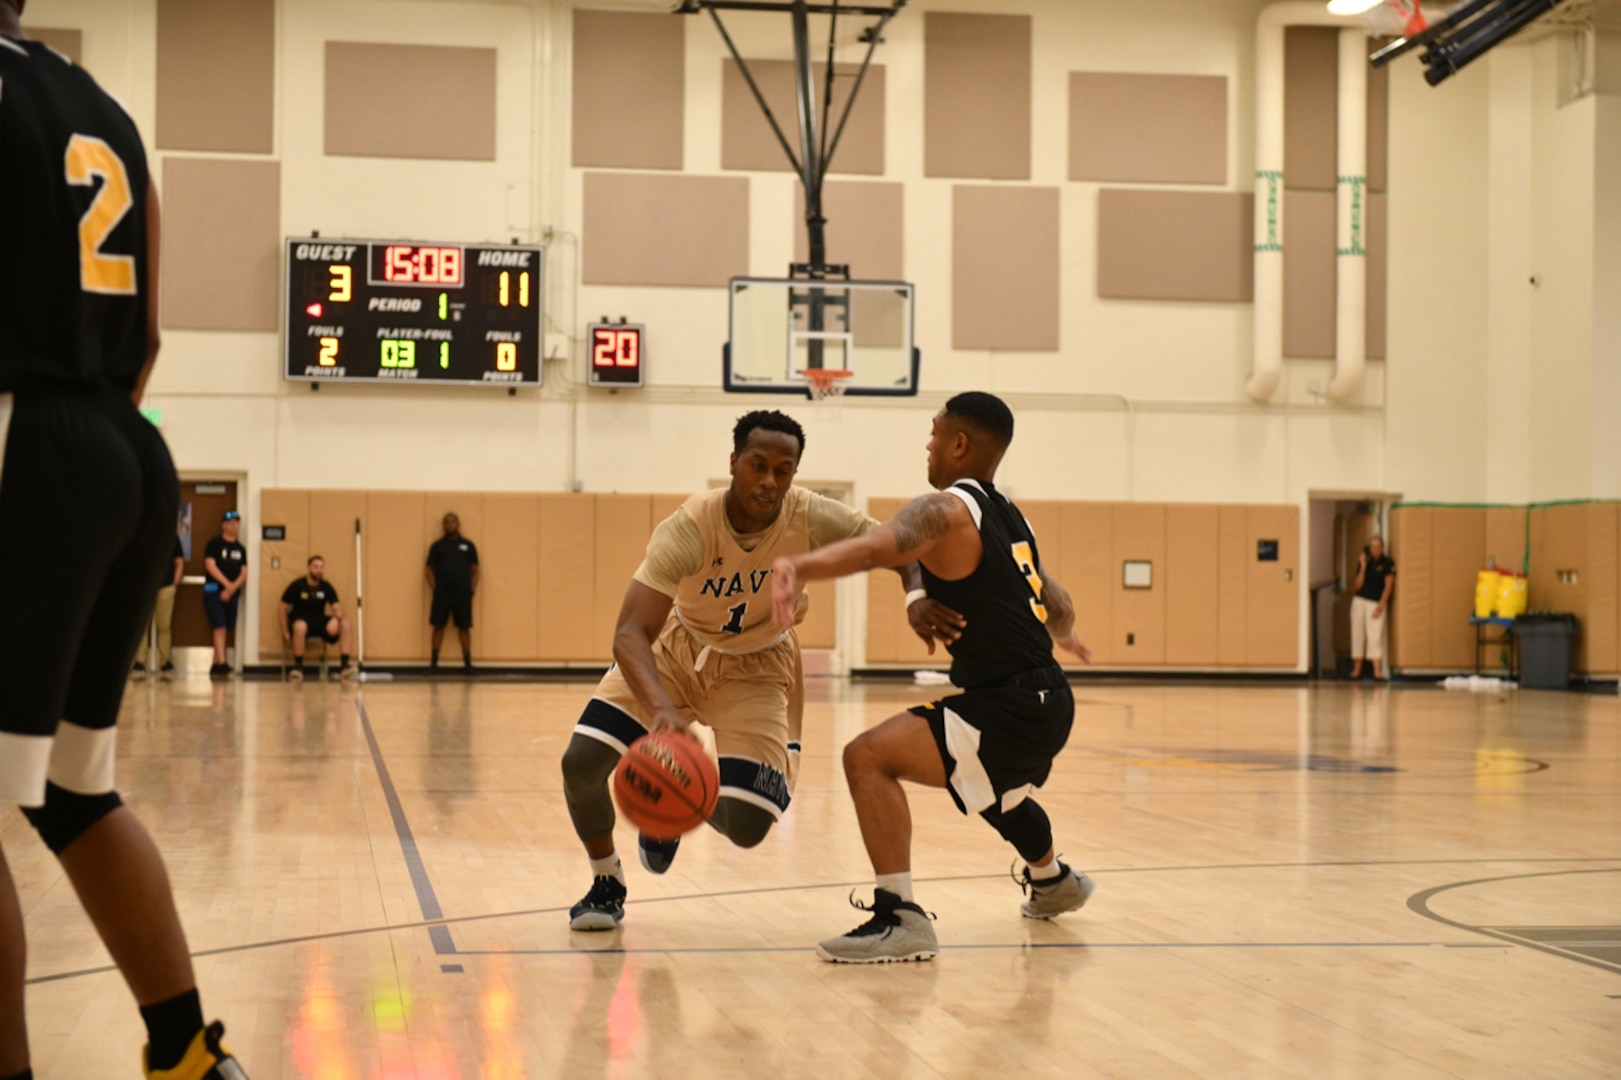 Navy Lt. J.G. Tilman Dunbar stationed aboard the USS Bataan drives past Army Spc. Alex Bradley of Kaiserslautern, Germany during Navy's gold medal victory. Elite U.S. military basketball players from around the world compete for dominance at Naval Station Mayport during the 2019 Armed Forces Men's and Women's Basketball Championship. Army, Marine Corps, Navy (with Coast Guard) and Air Force teams square off at the annual event which features double round-robin action, followed by championship and consolation games to crown the best players in the military. (U.S. Navy photo by Mass Communication Specialist 1st Class Gulianna Dunn/RELEASED)